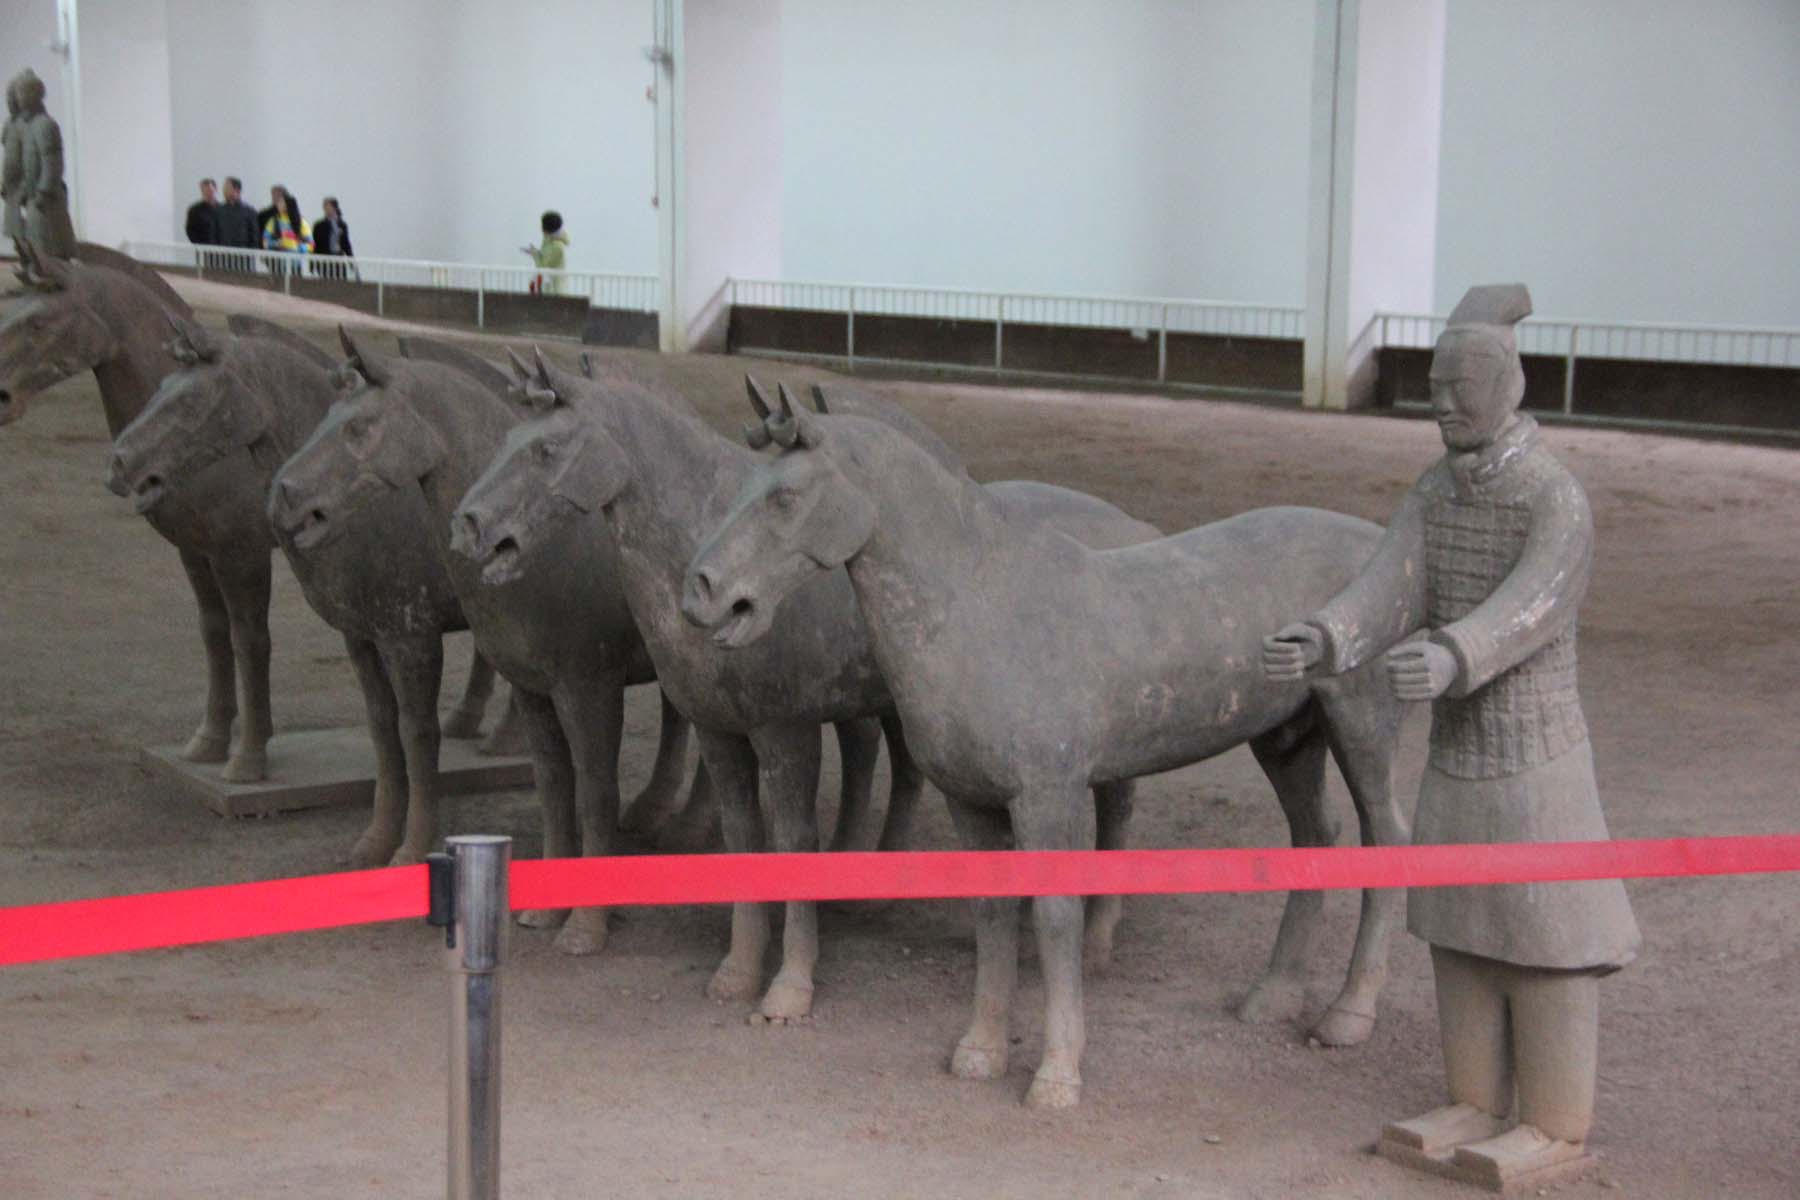 Well-preserved cavalry horses at the rear of Pit No. 1.